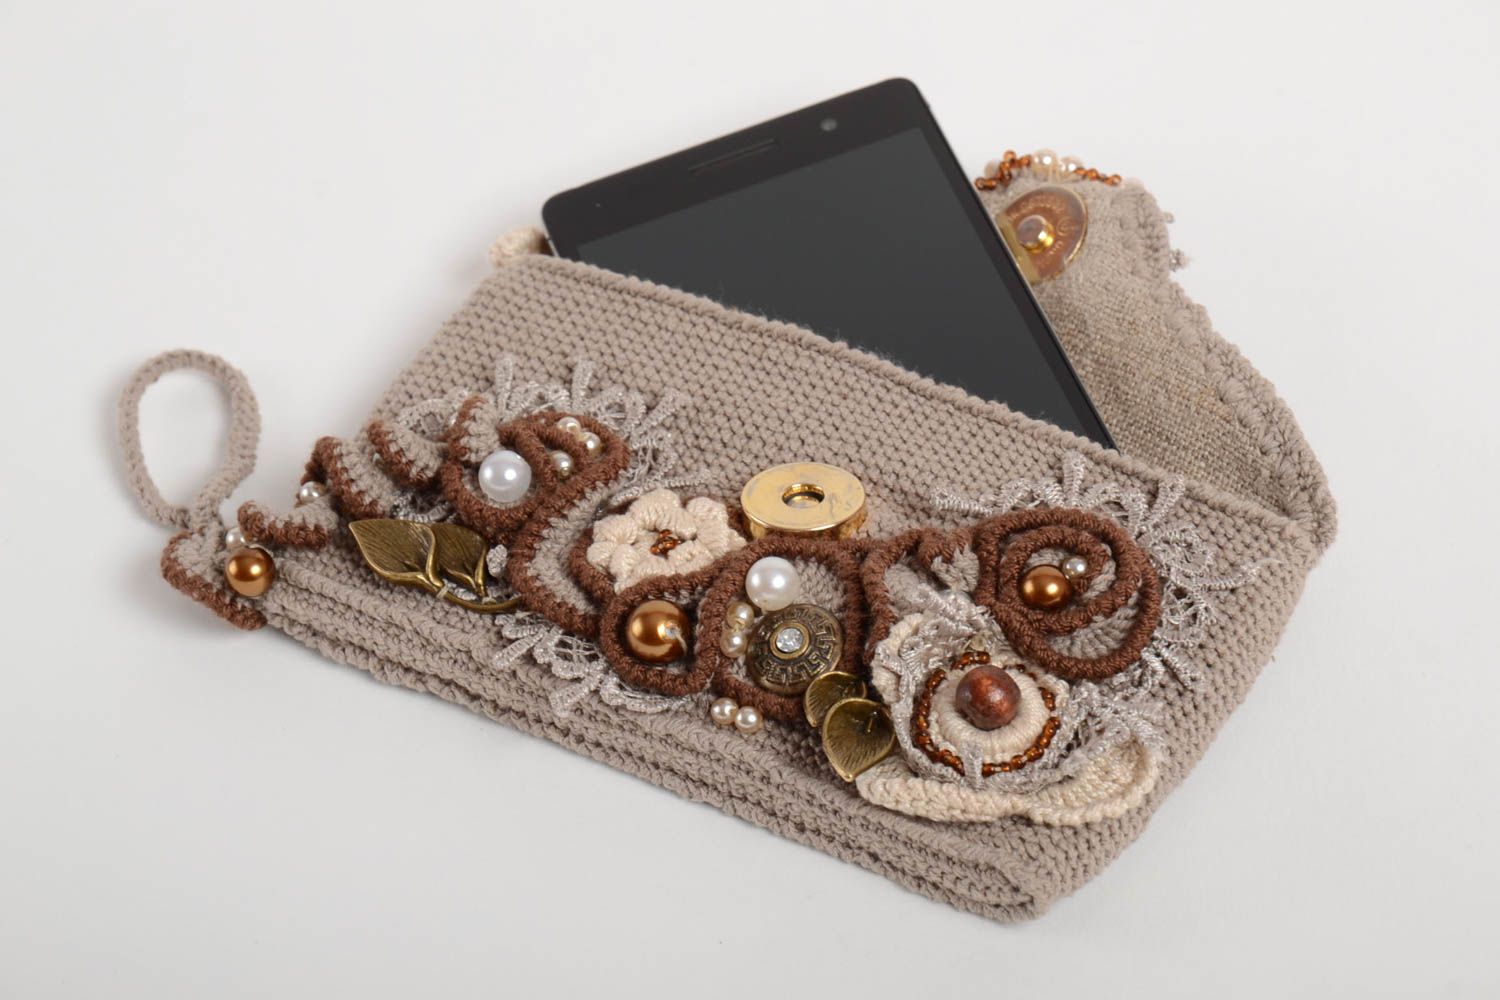 Crochet phone pouch handmade cases for phone designer accessories gifts for girl photo 1